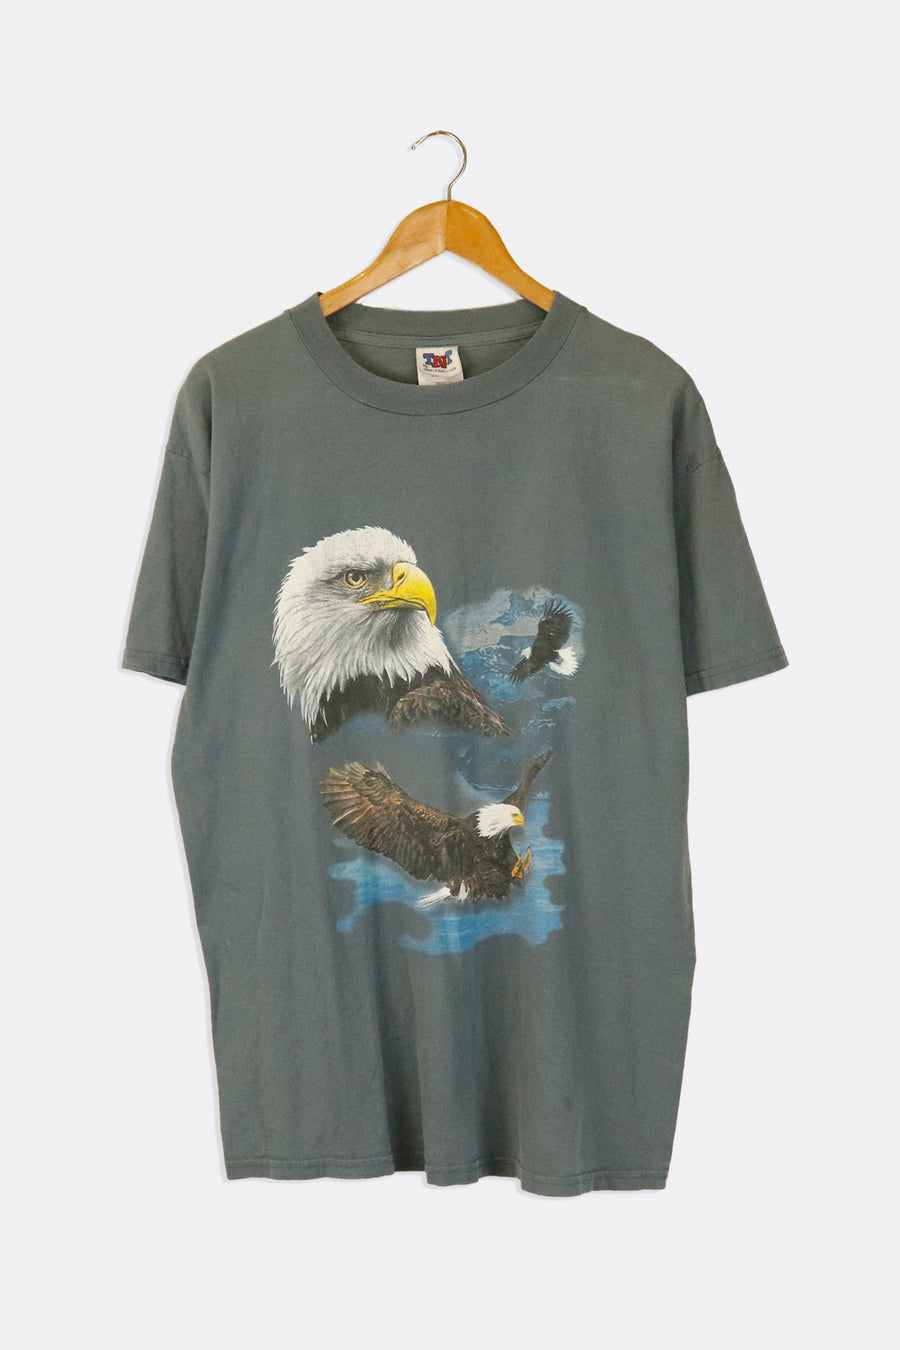 Vintage Bald Eagle Trifecta In The Sky Graphic T Shirt Sz L